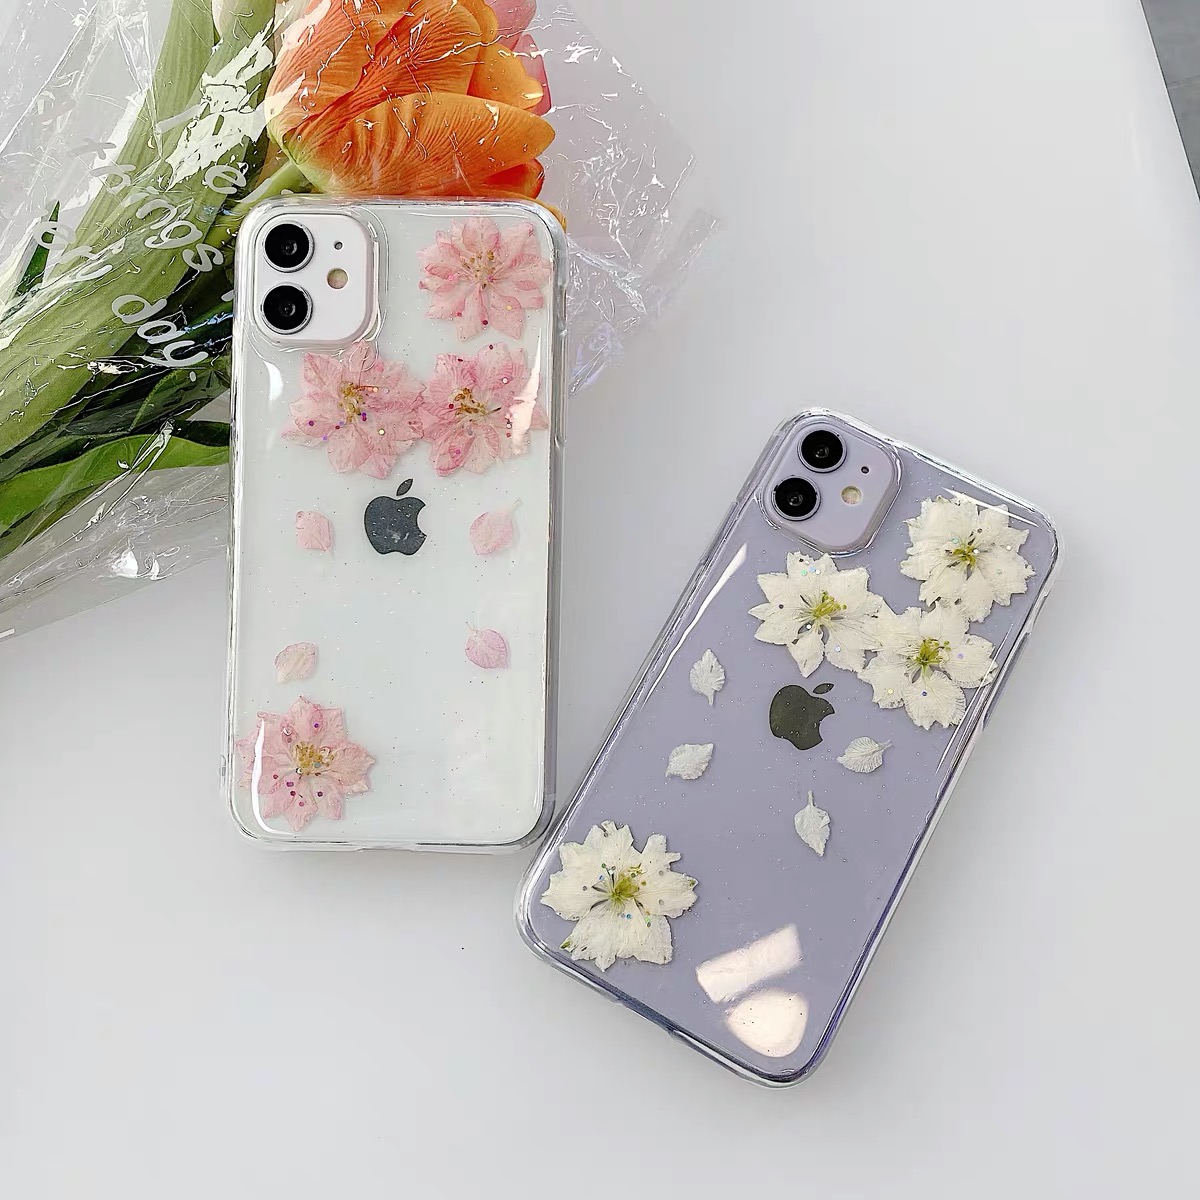 Pink & White Dried Flowers Iphone 12 11 Pro Max Case Iphone 12 Mini Case Iphone 11 Xs Max Case Iphone Xr Case Iphone 7 8 Plus Se 2020